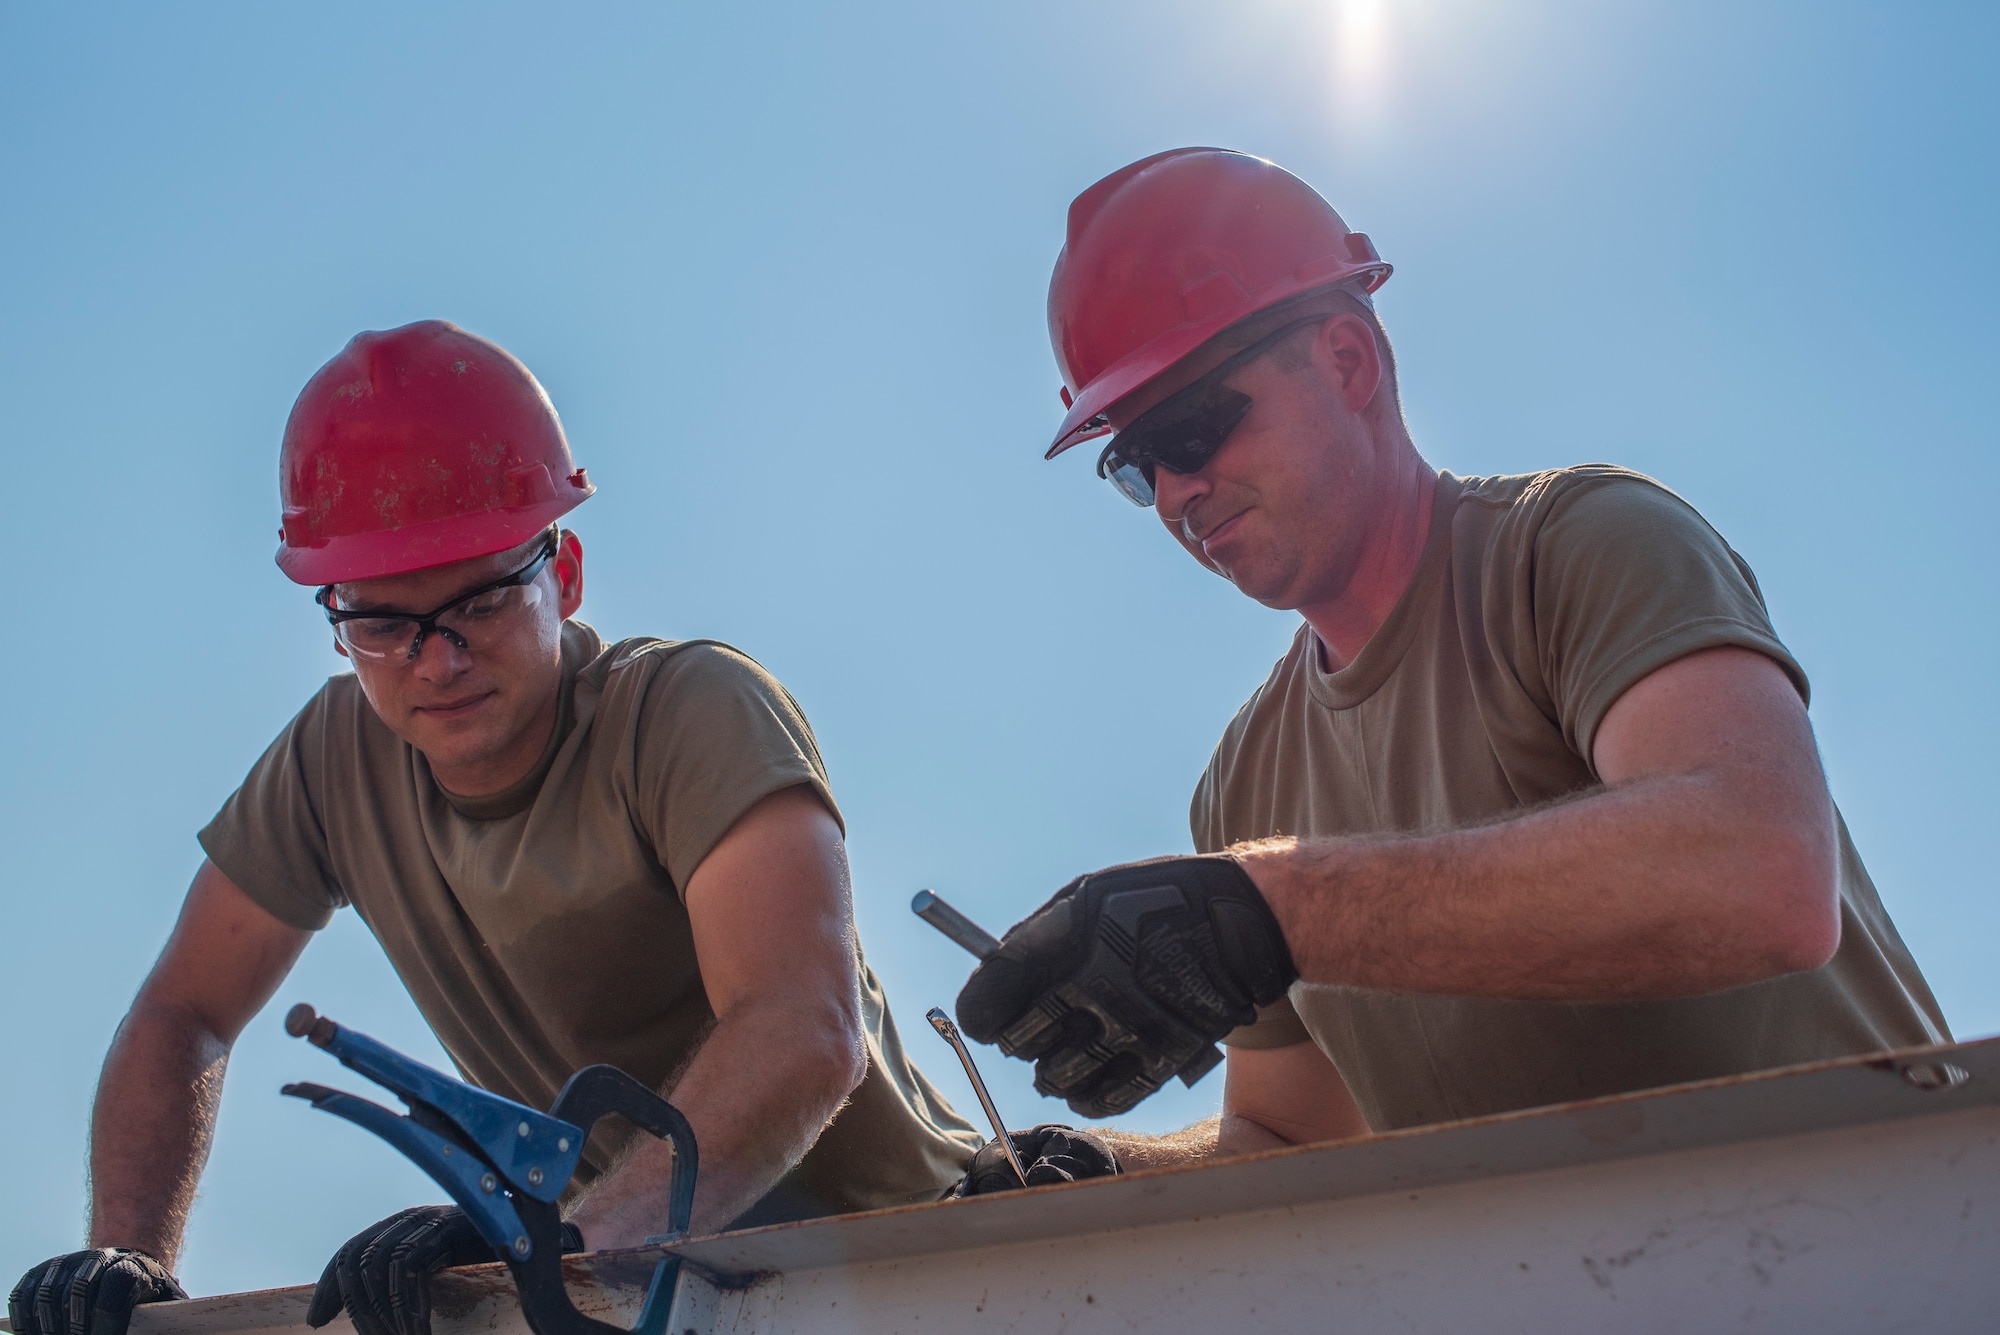 Two men work wearing red hard hats and the Air Force OCP uniform.